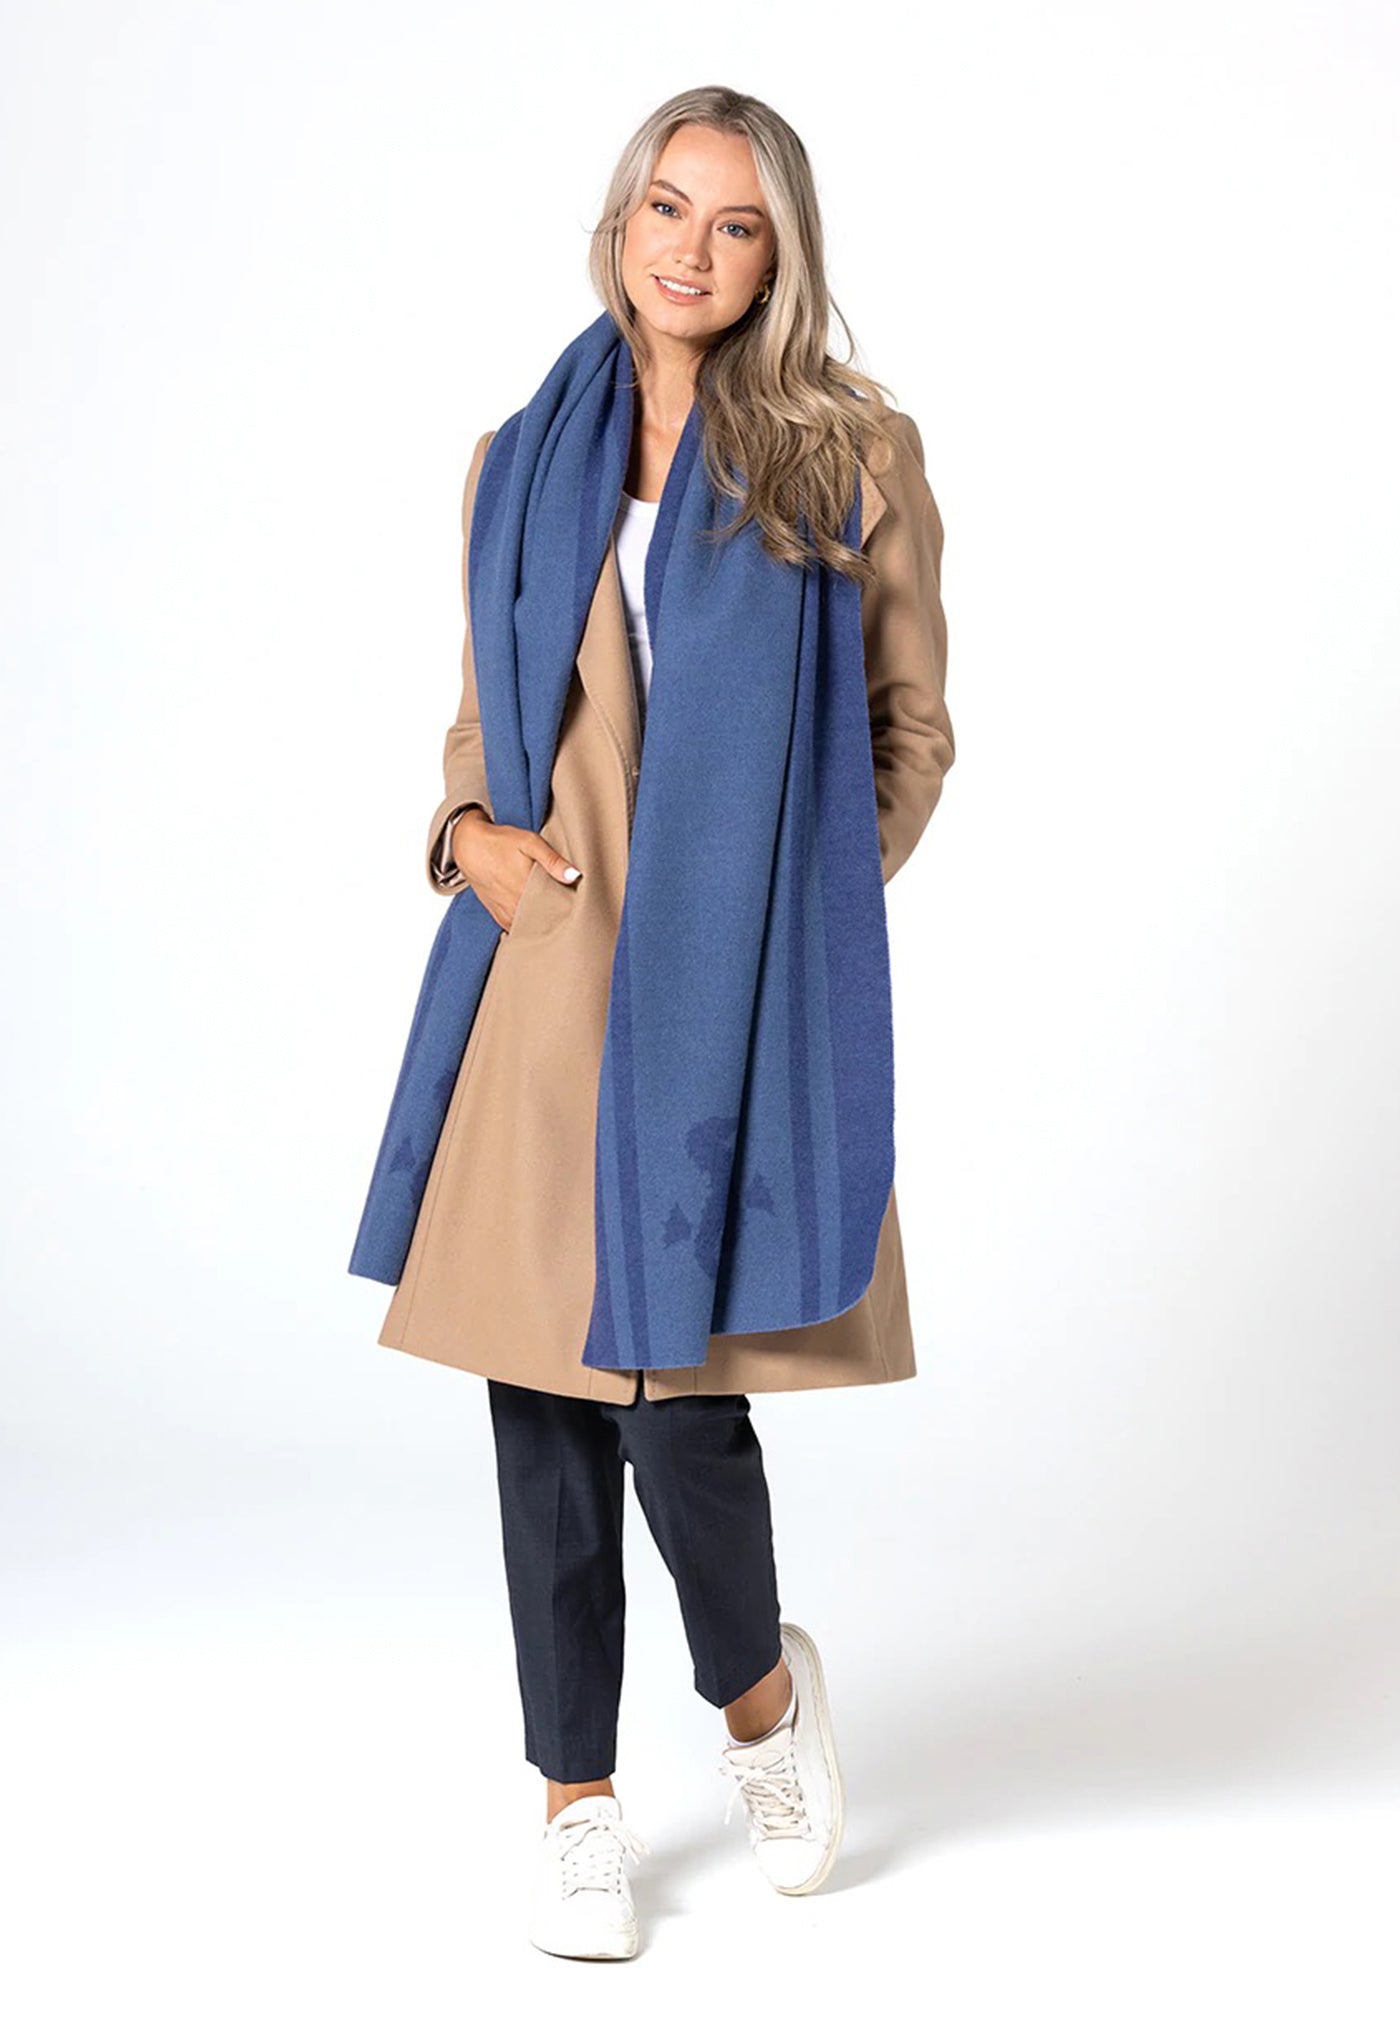 The Chesterman Wool Scarf - Blue sold by Angel Divine